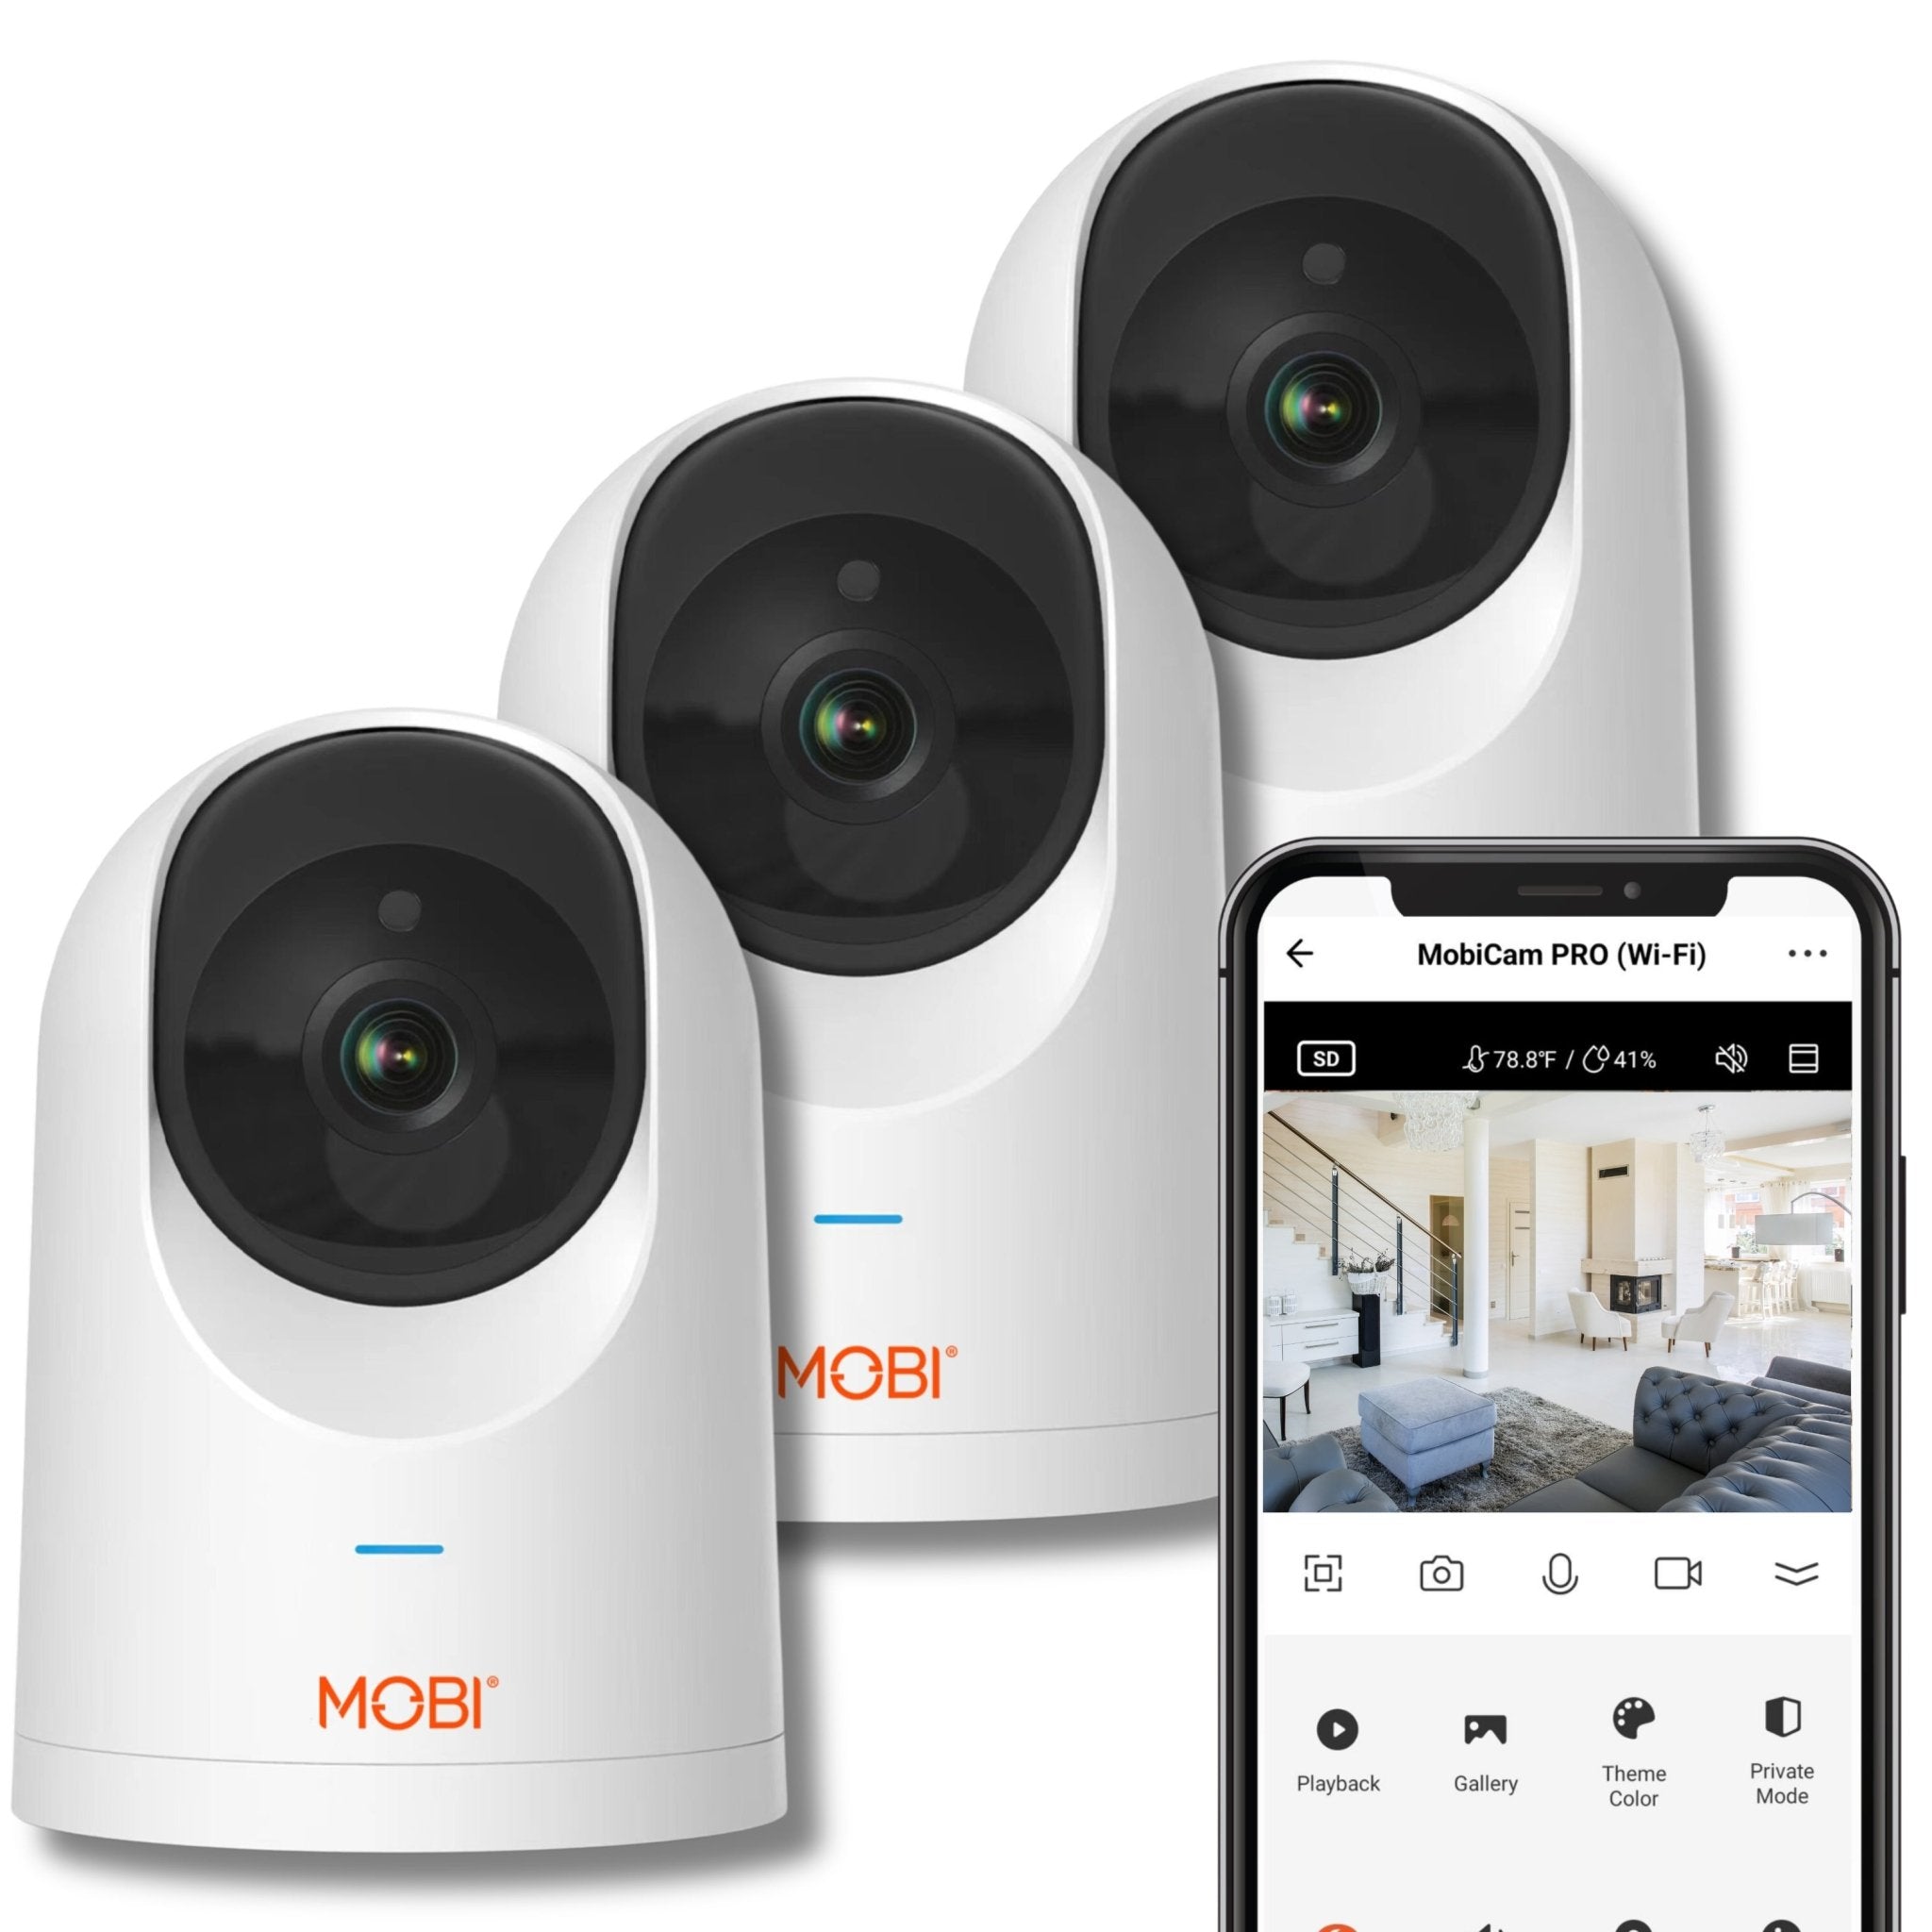 MobiCam PRO Intelligent Home Monitoring Camera: Full HD, Pan & Tilt, Color Night Vision, Motion Tracking, Temp & Humidity Readings. Supports Cloud & SD Storage, Smart App Compatible - MOBI USA